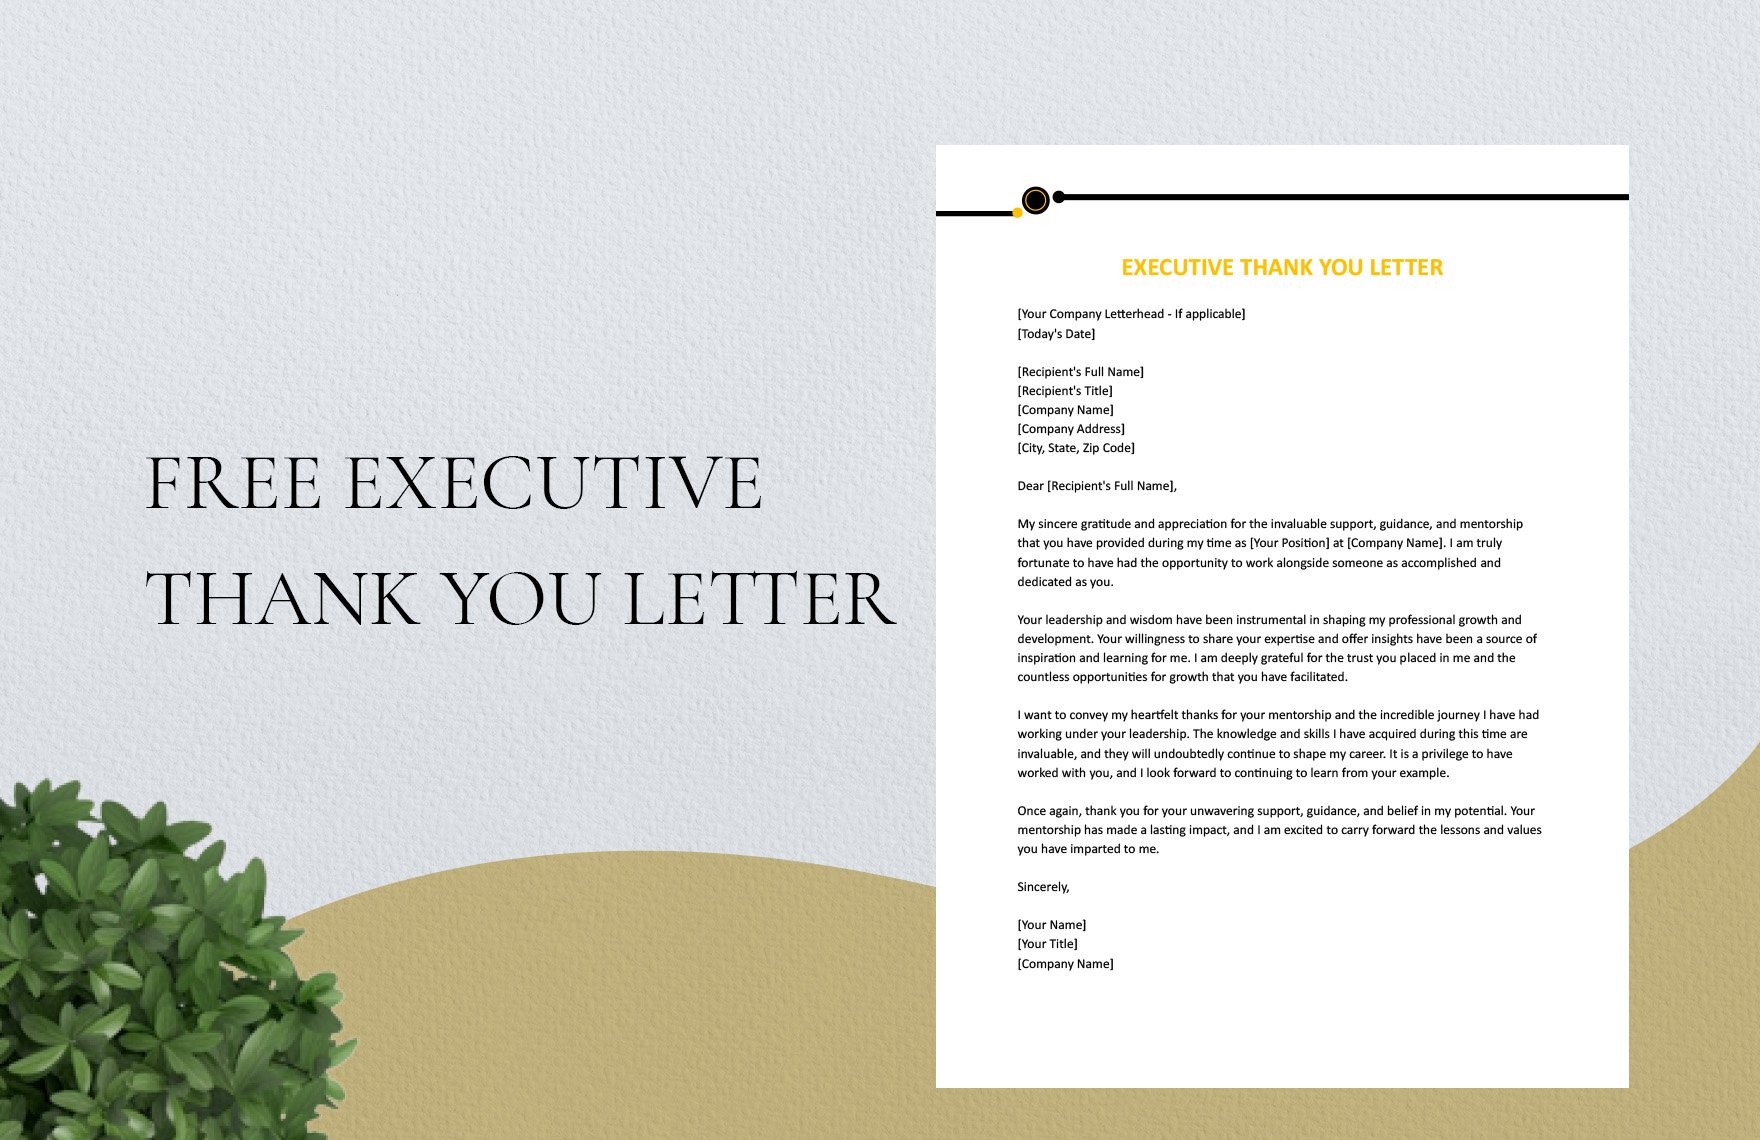 Executive Thank You Letter